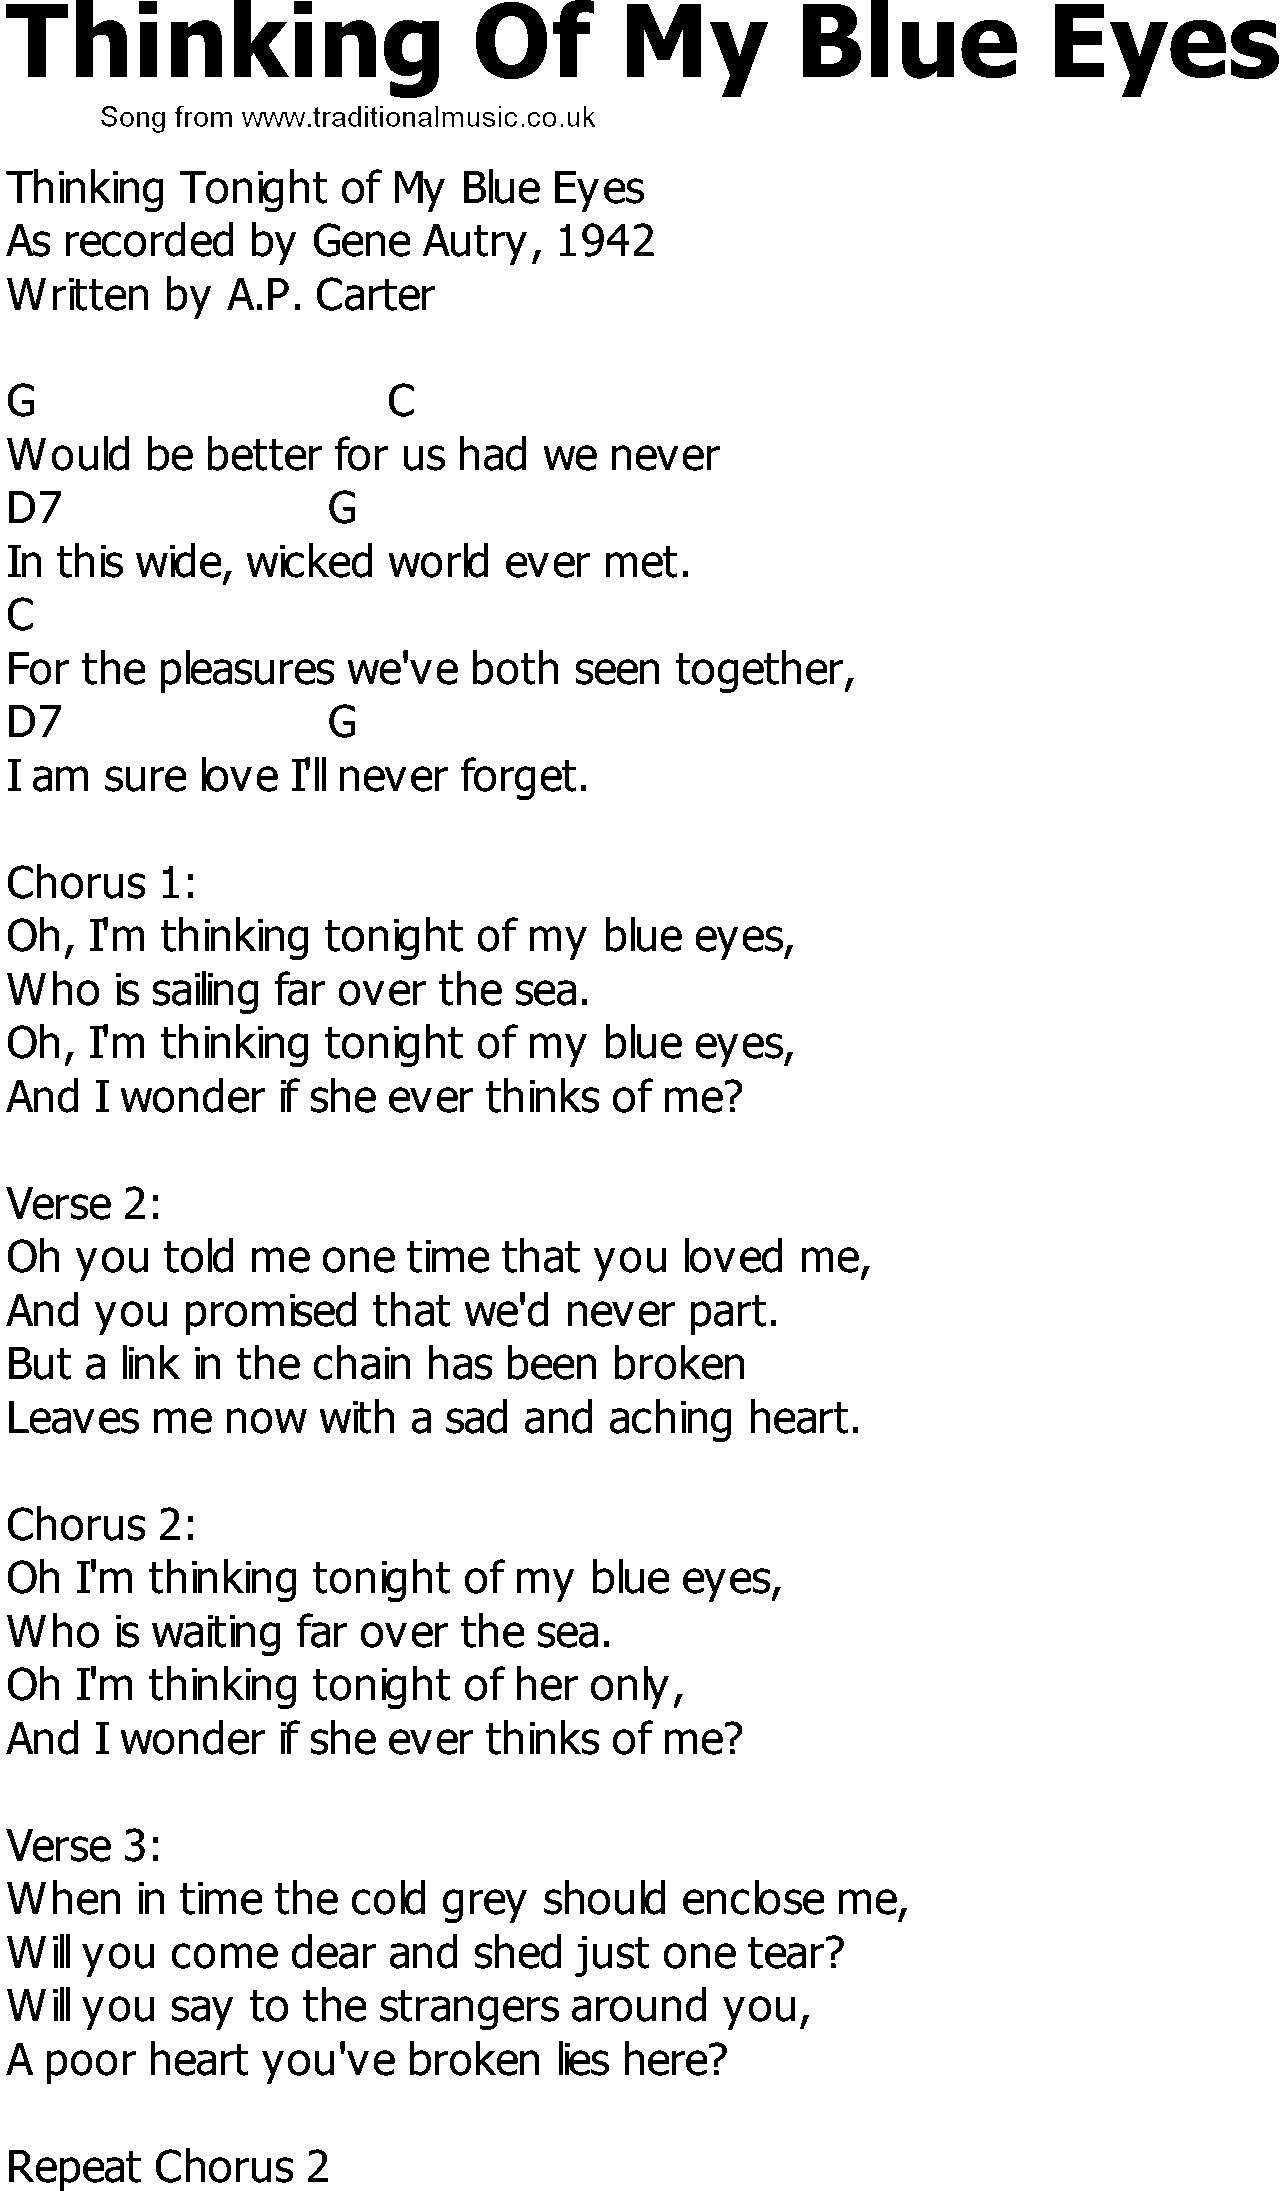 Old Country song lyrics with chords - Thinking Of My Blue Eyes